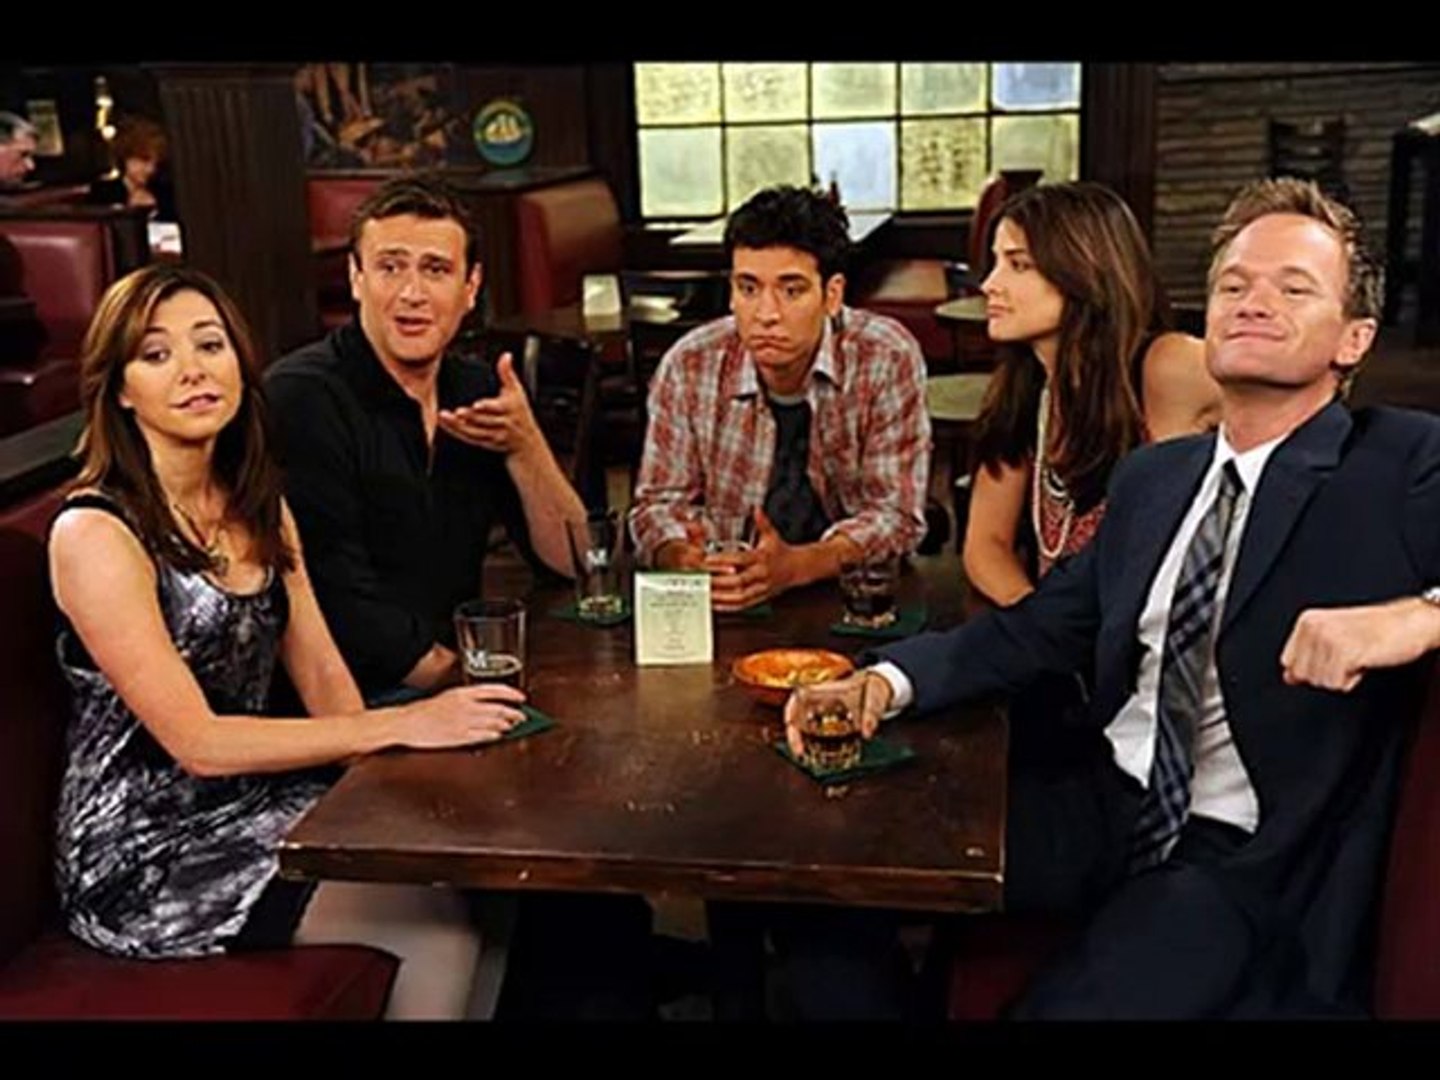 How I Met Your Mother Season 5 Episode 1 "Definitions" - video Dailymotion